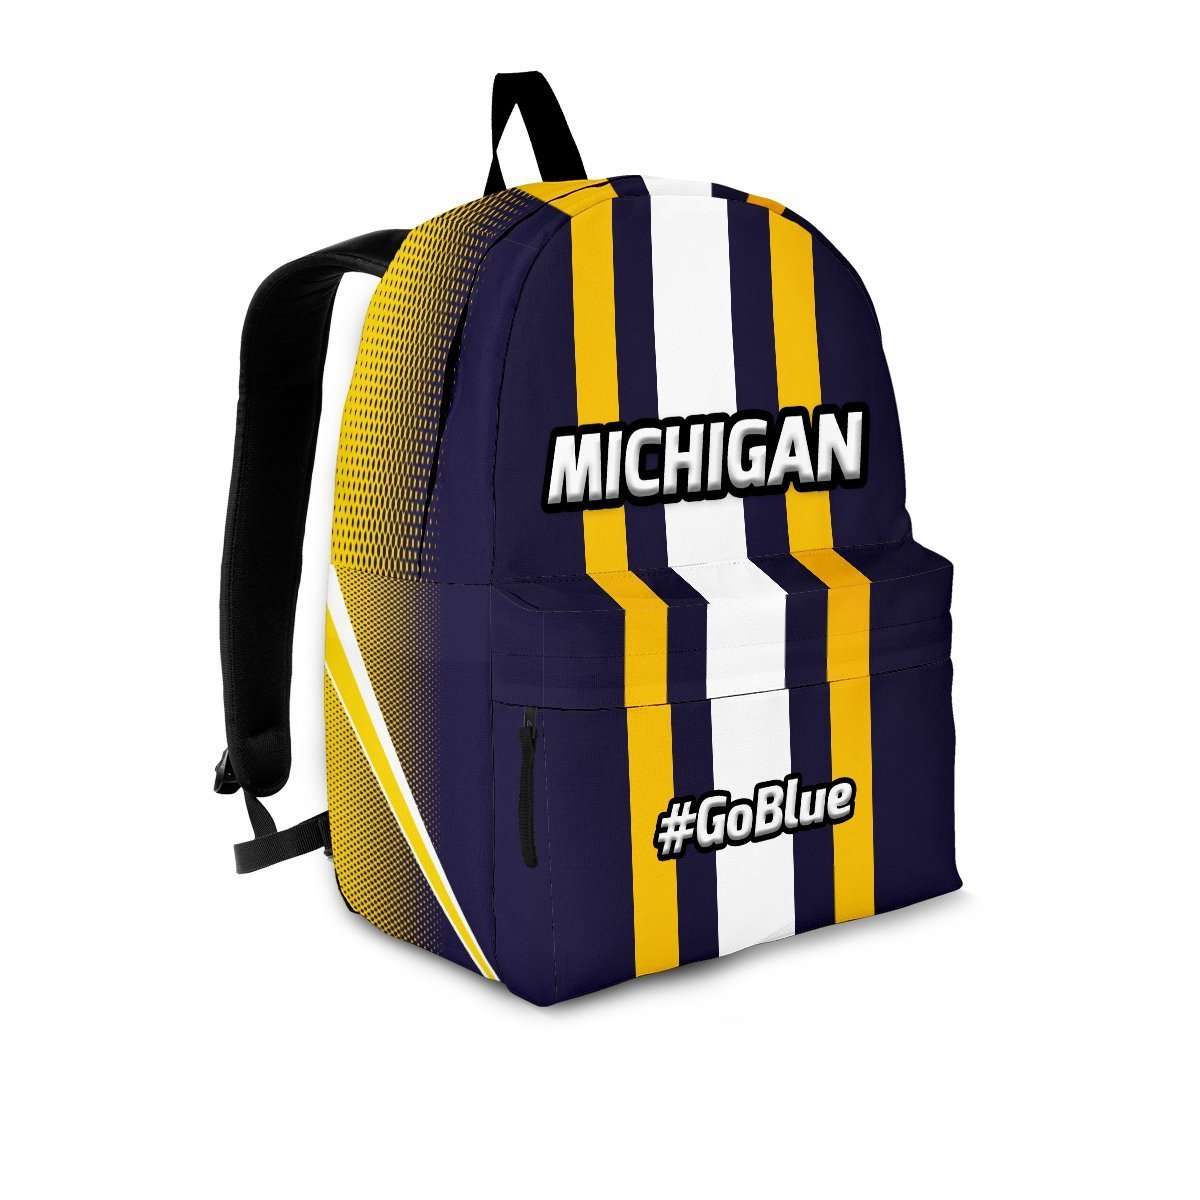 Designs by MyUtopia Shout Out:#GoBlue Michigan Standard Size Backpack,Large (18 x 14 x 8 inches) / Adult (Ages 13+) / Blue/Yellow/White,Backpacks